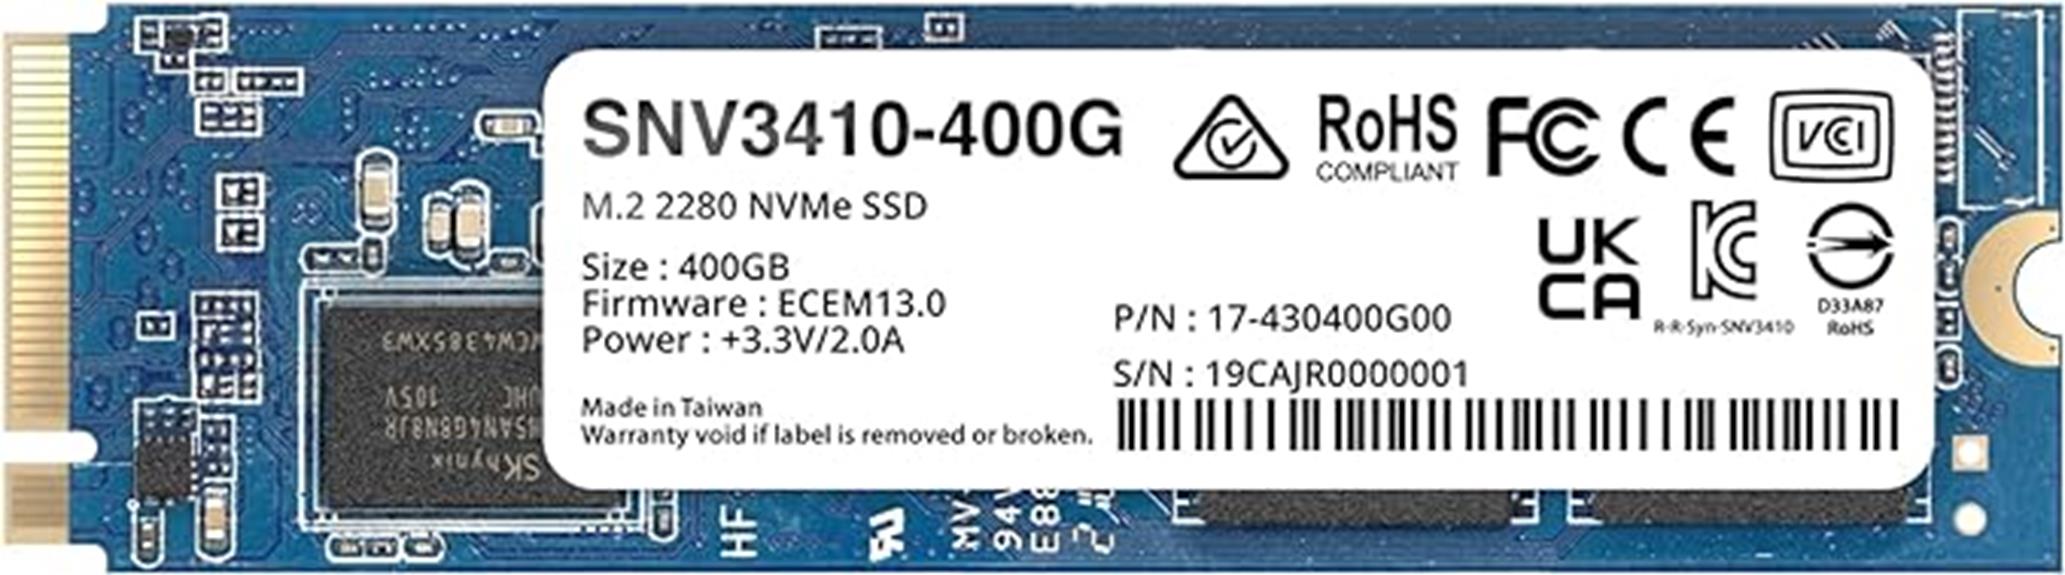 high performance synology nvme ssd